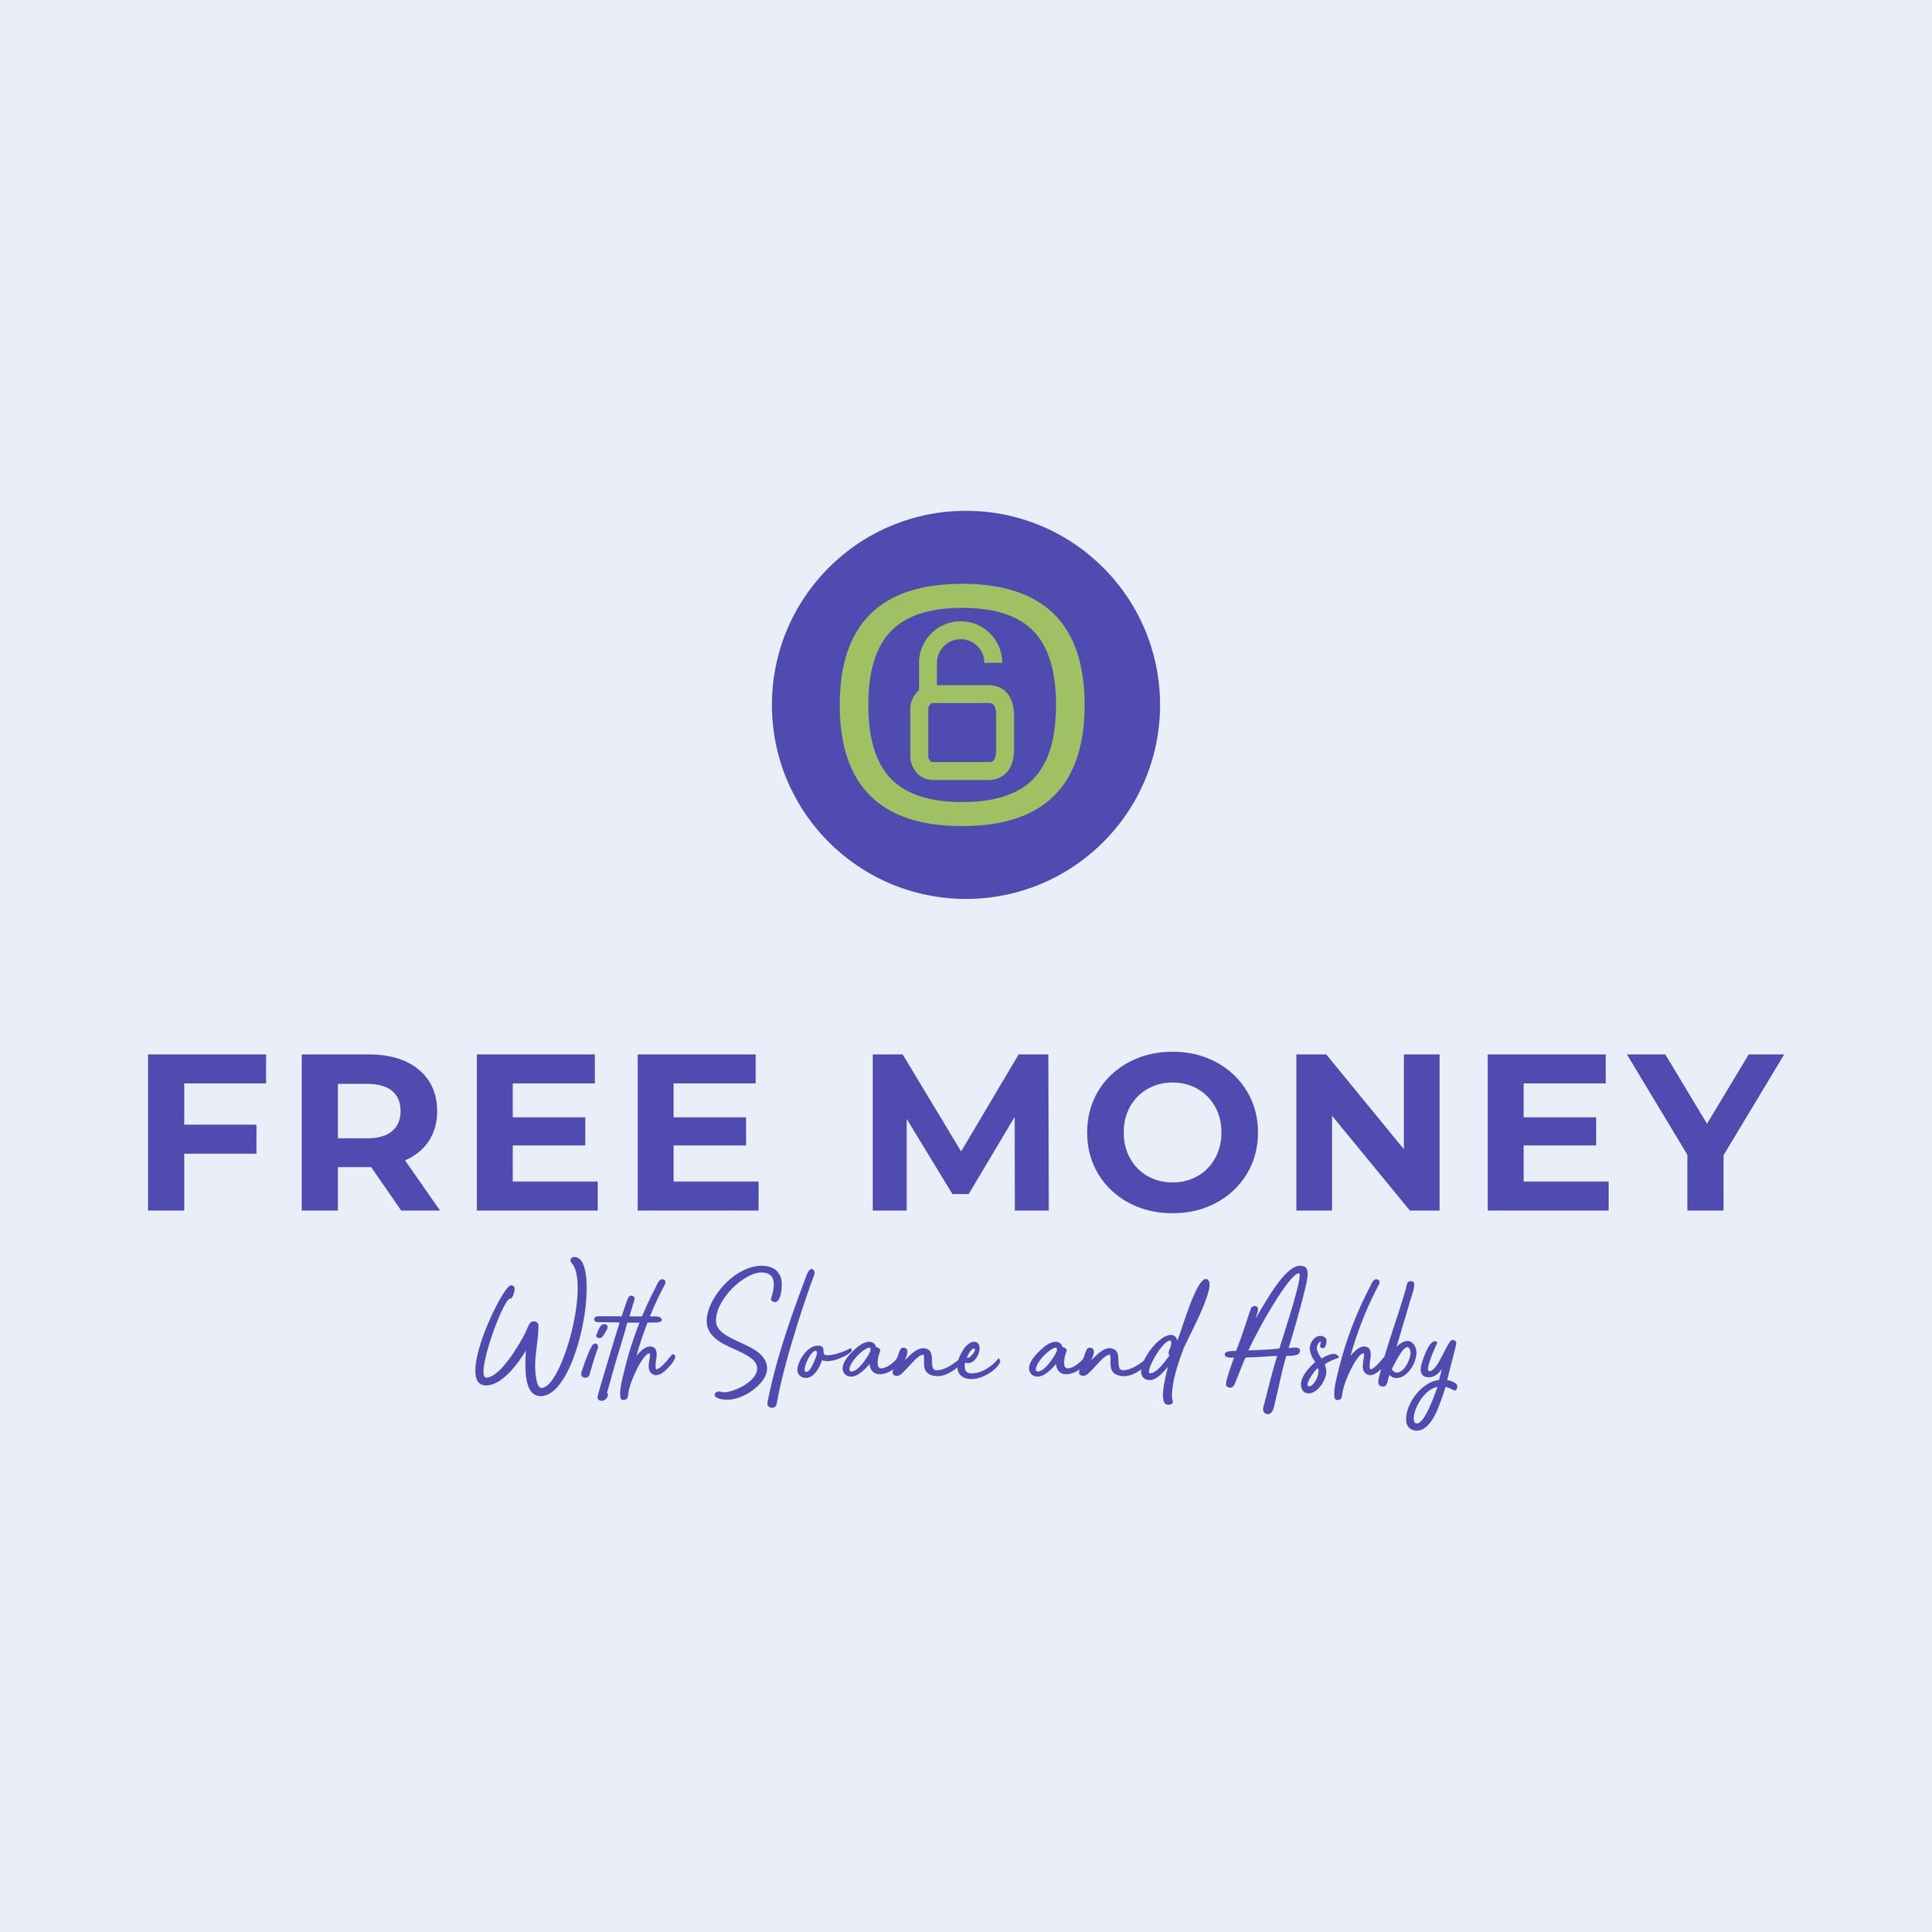 Free Money Podcast: Know What You Own With Andy Behar